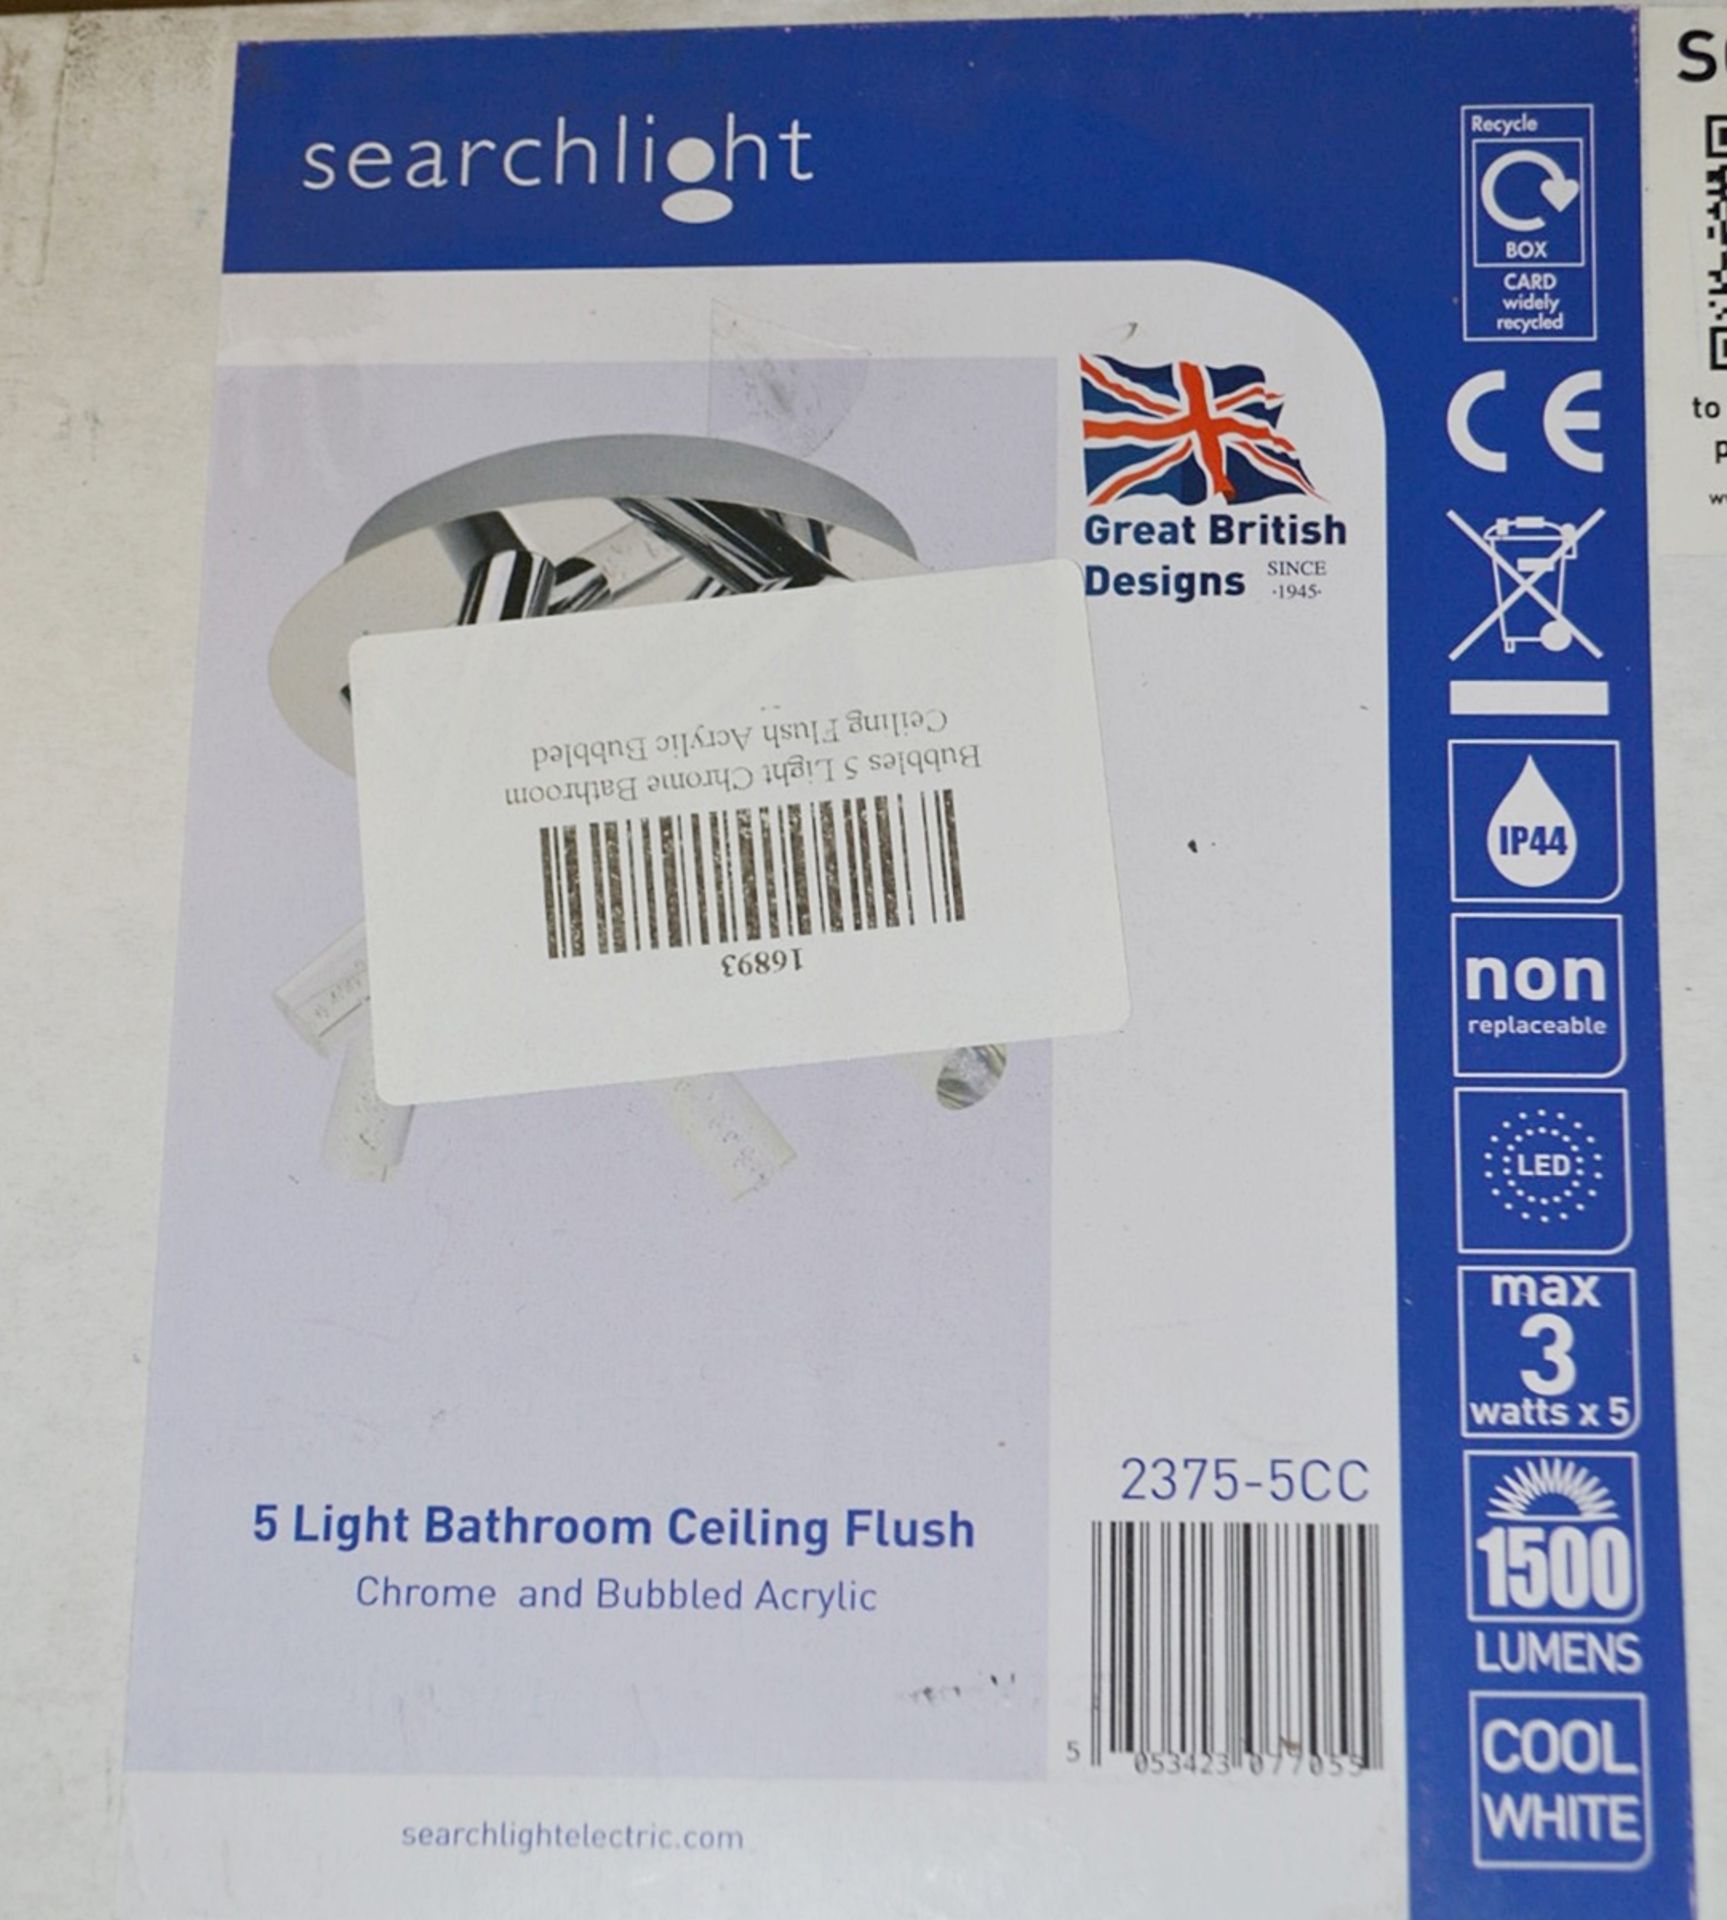 5 x Searchlight 5-Light Bathroom Ceiling Flush with Bubbled Acrylic and Chrome Rods - 2375-5CC - New - Image 3 of 3